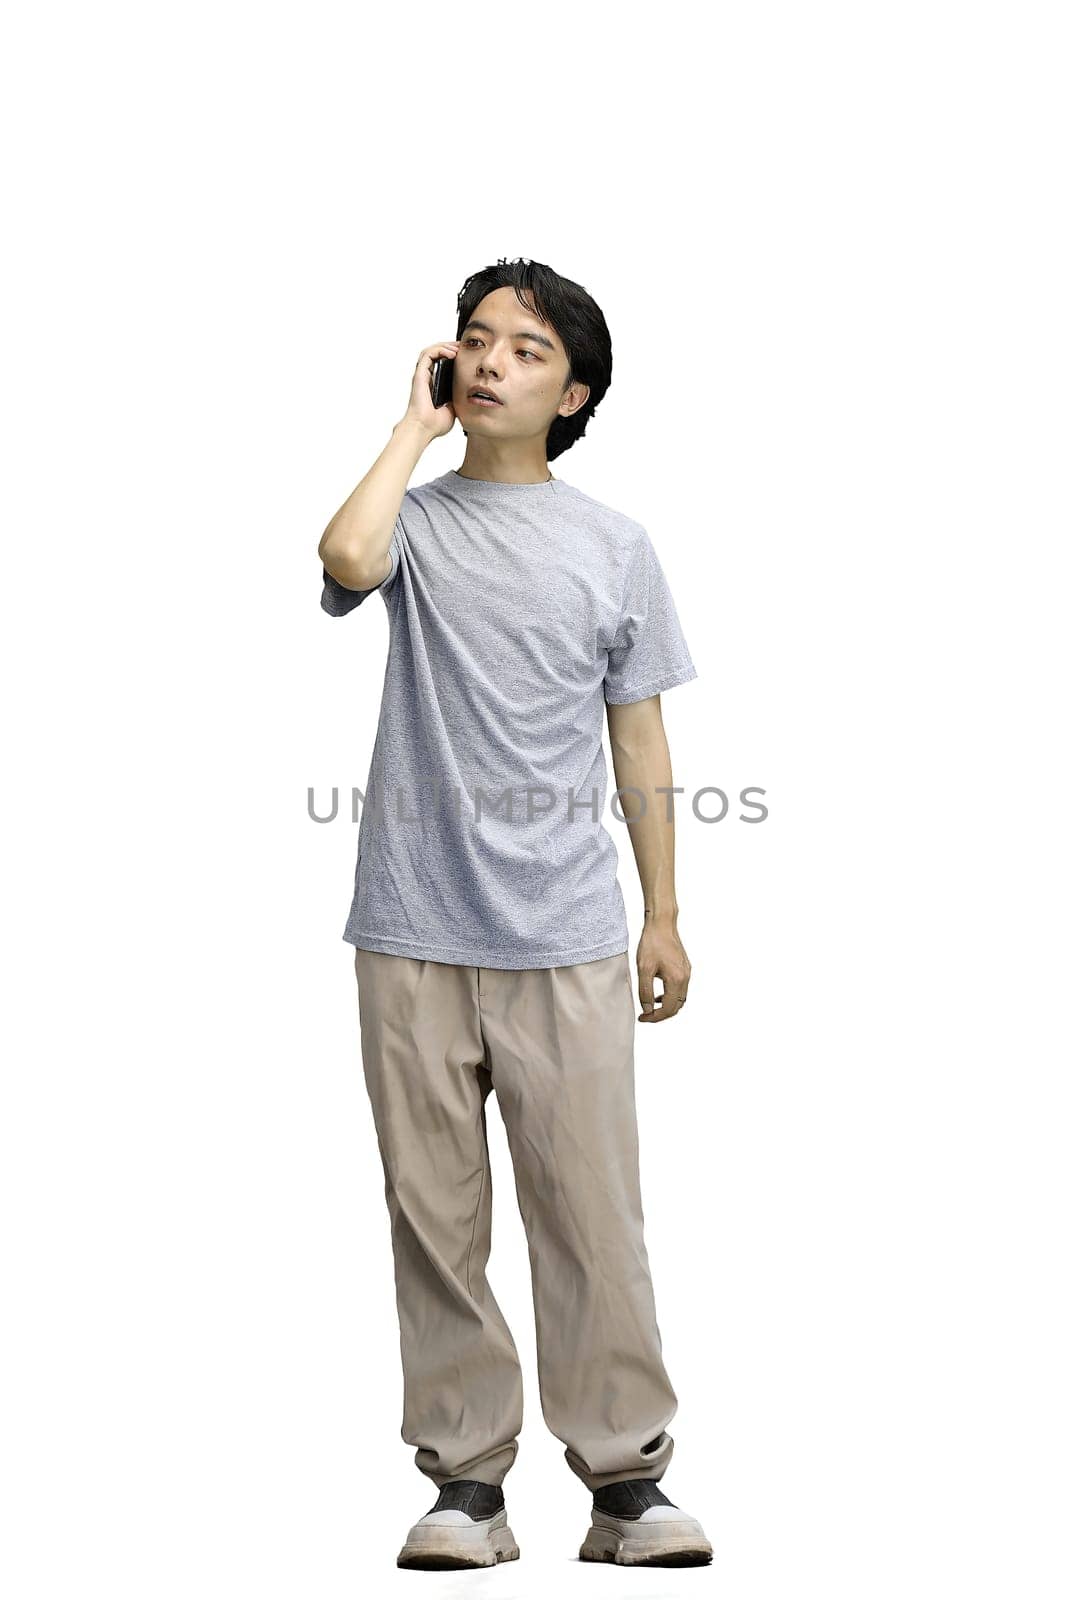 A guy in a gray T-shirt, on a white background, full-length, talking on the phone.